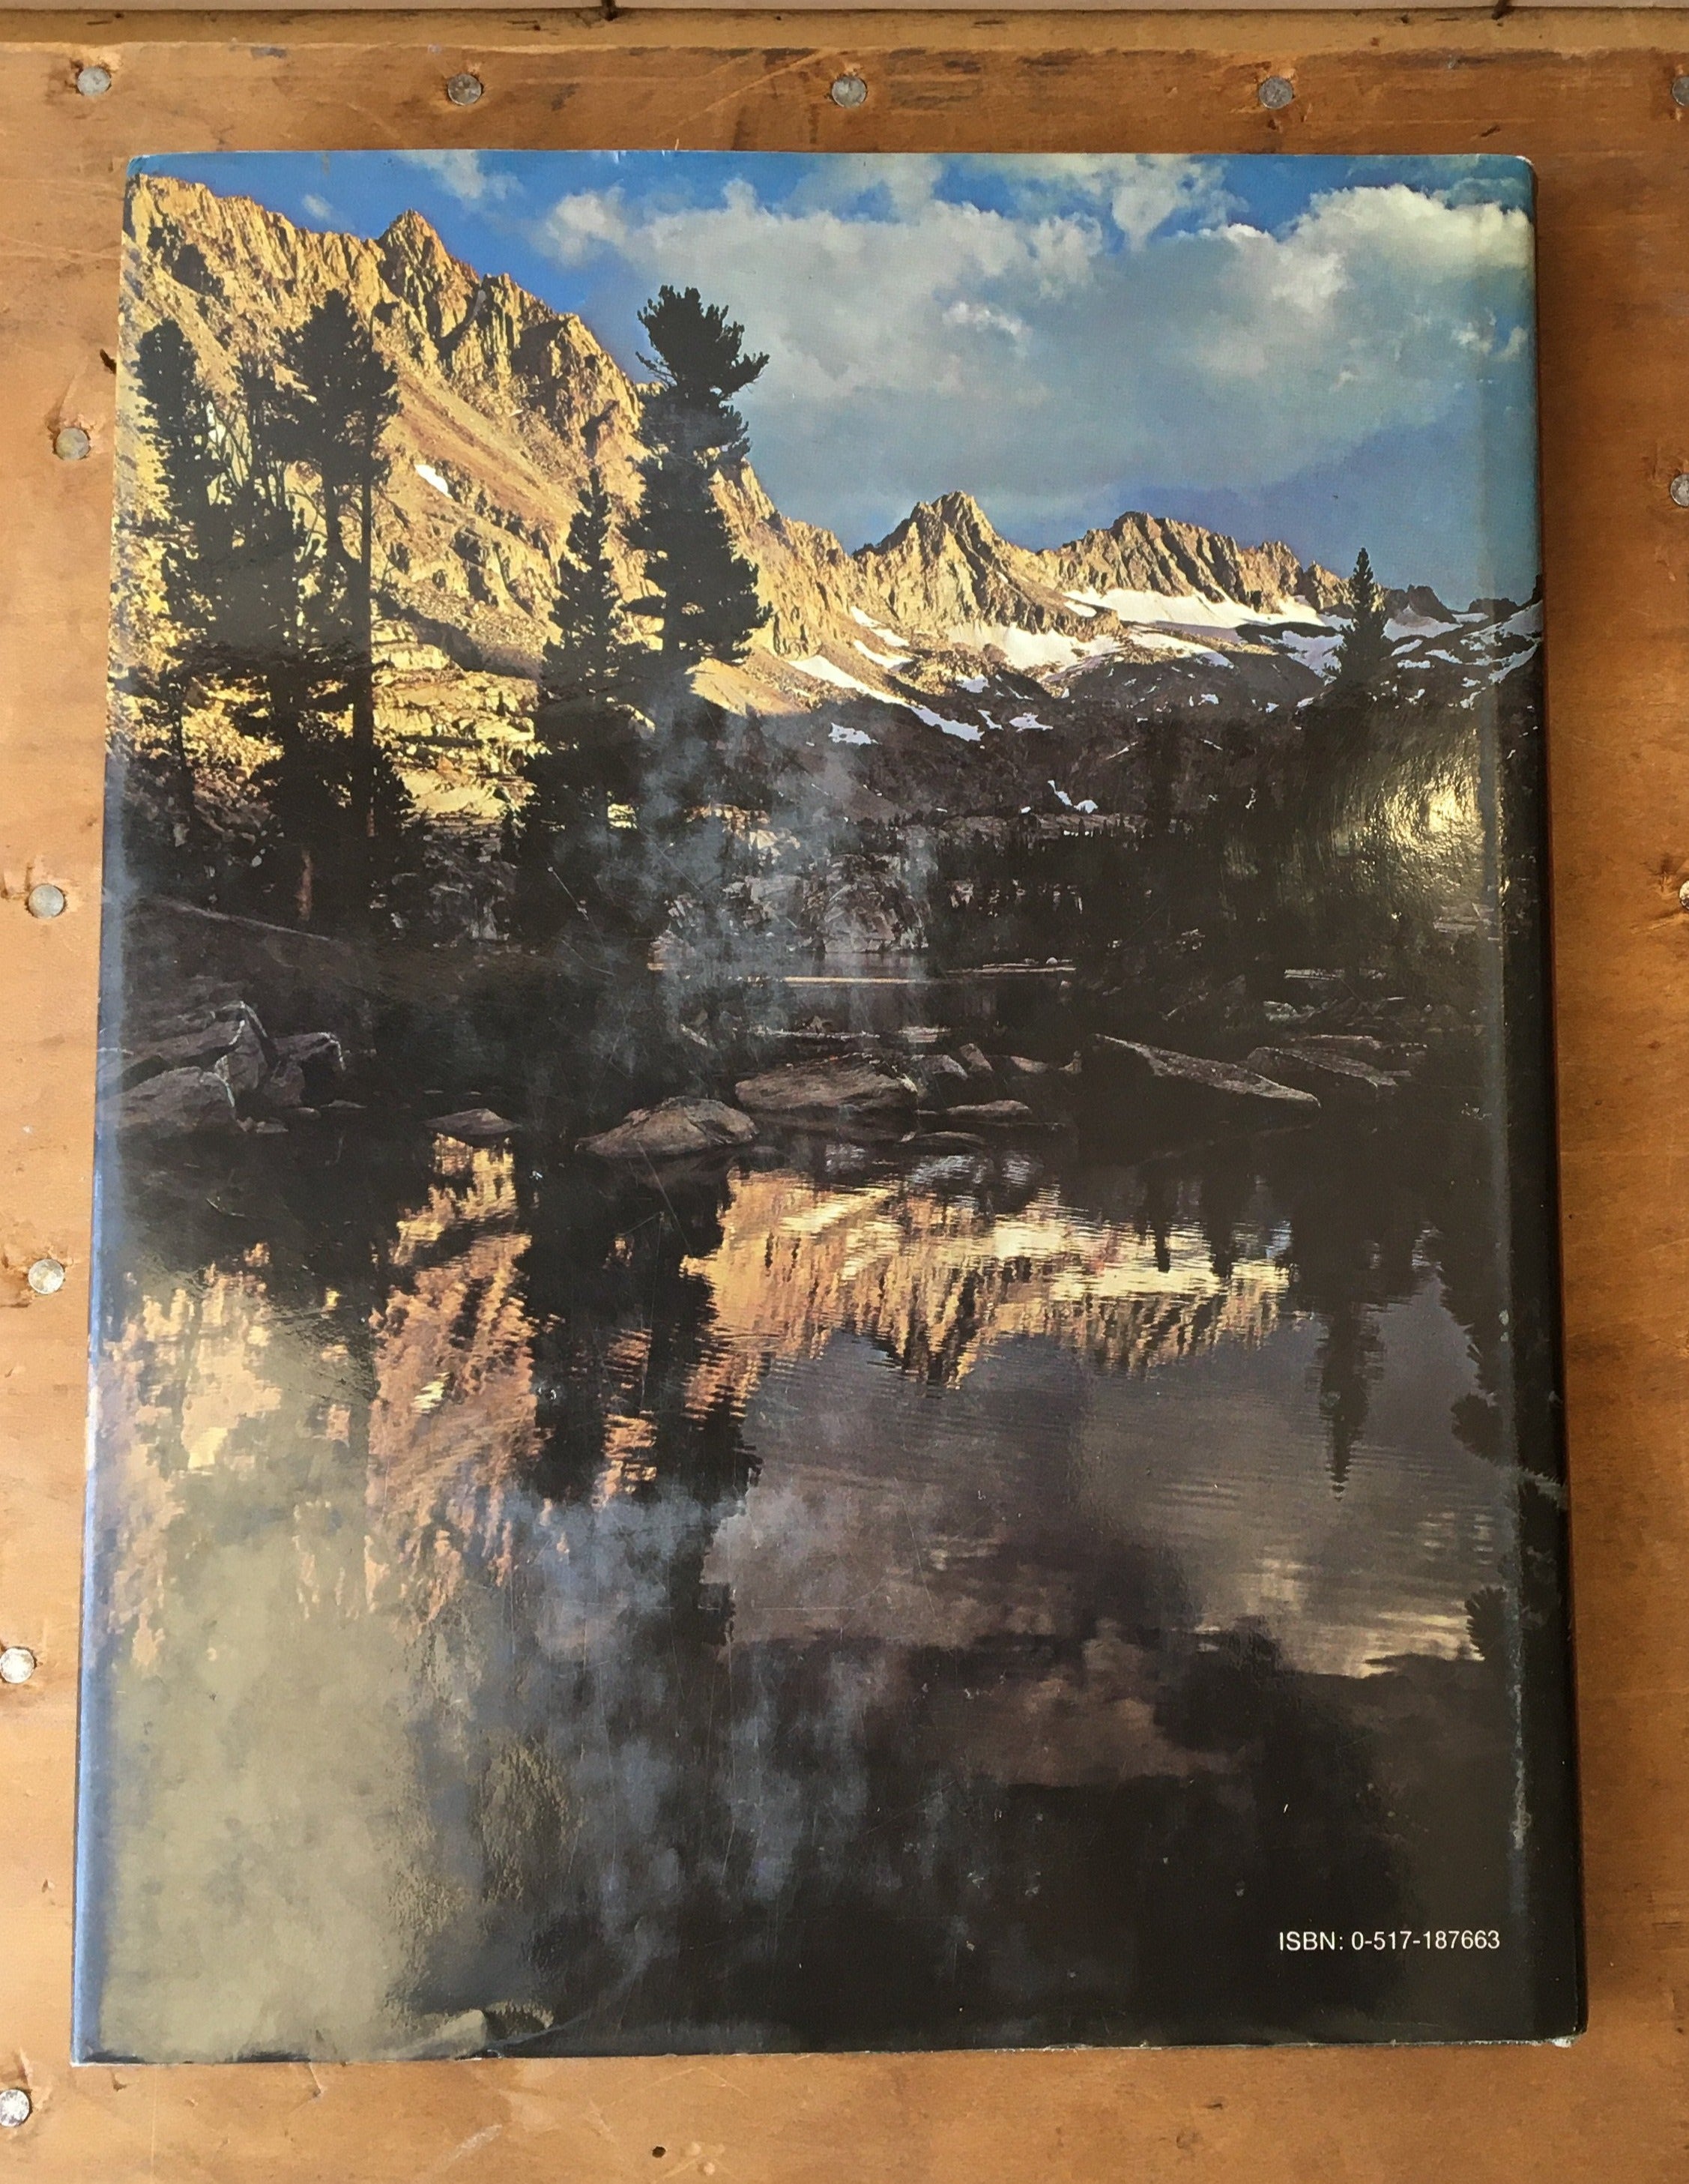 The Mighty Sierra, Portrait of a Mountain World, 1973